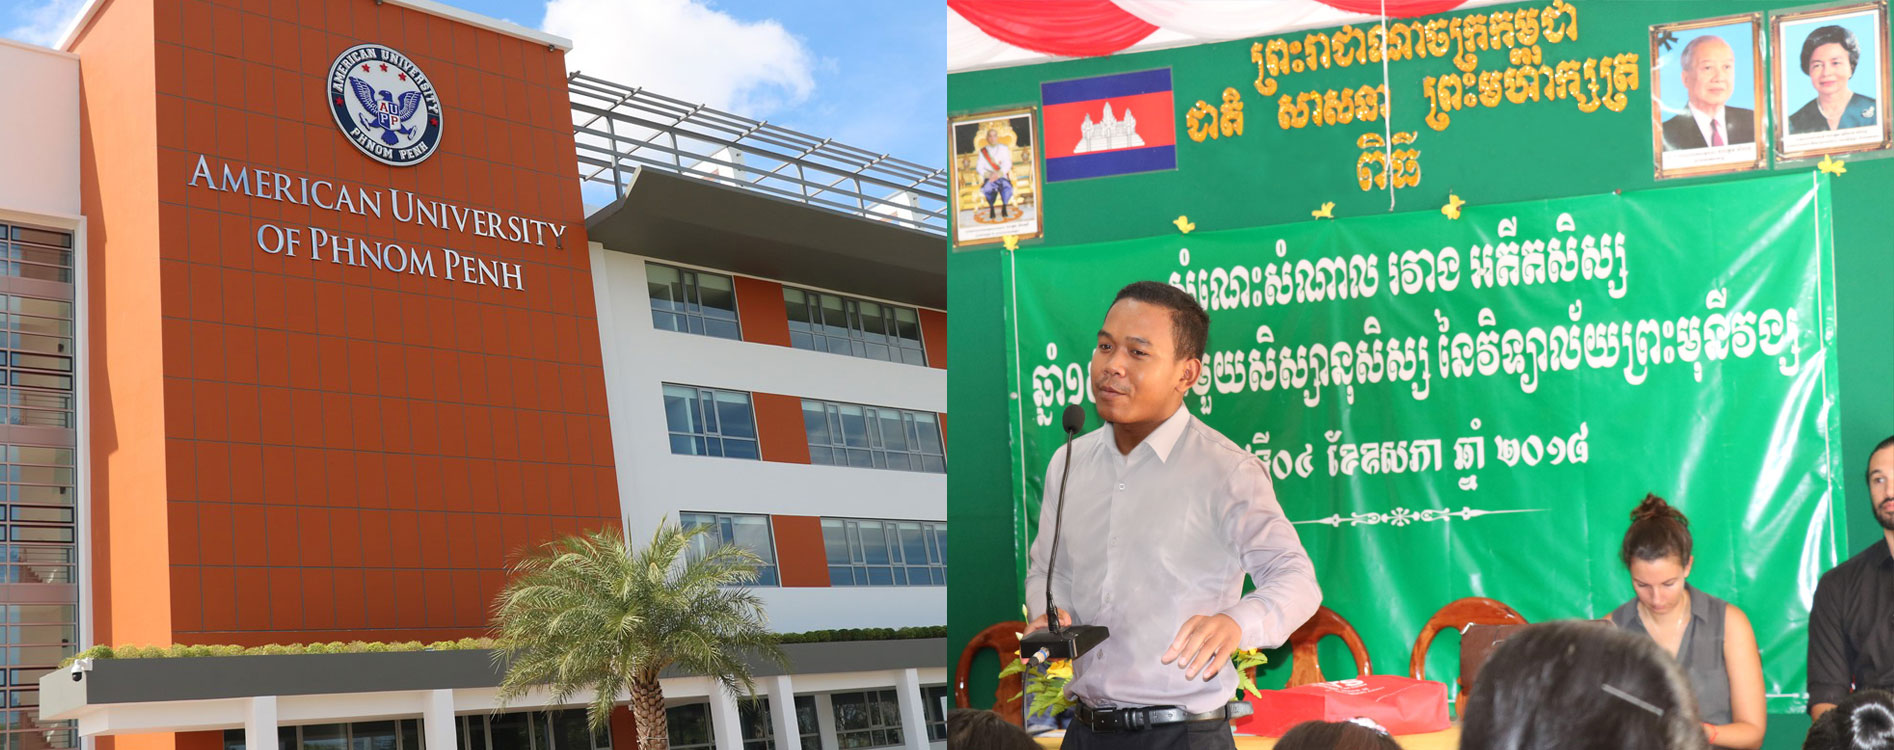 JPA alum Chivit, Class of 2015, is at the American University of Phnom Penh (AUPP). President of the AUPP Student Government. Jay Pritzker Academy, Siem Reap, Cambodia. Jay-Pritzker-Academy-Siem-Reap-Cambodia.